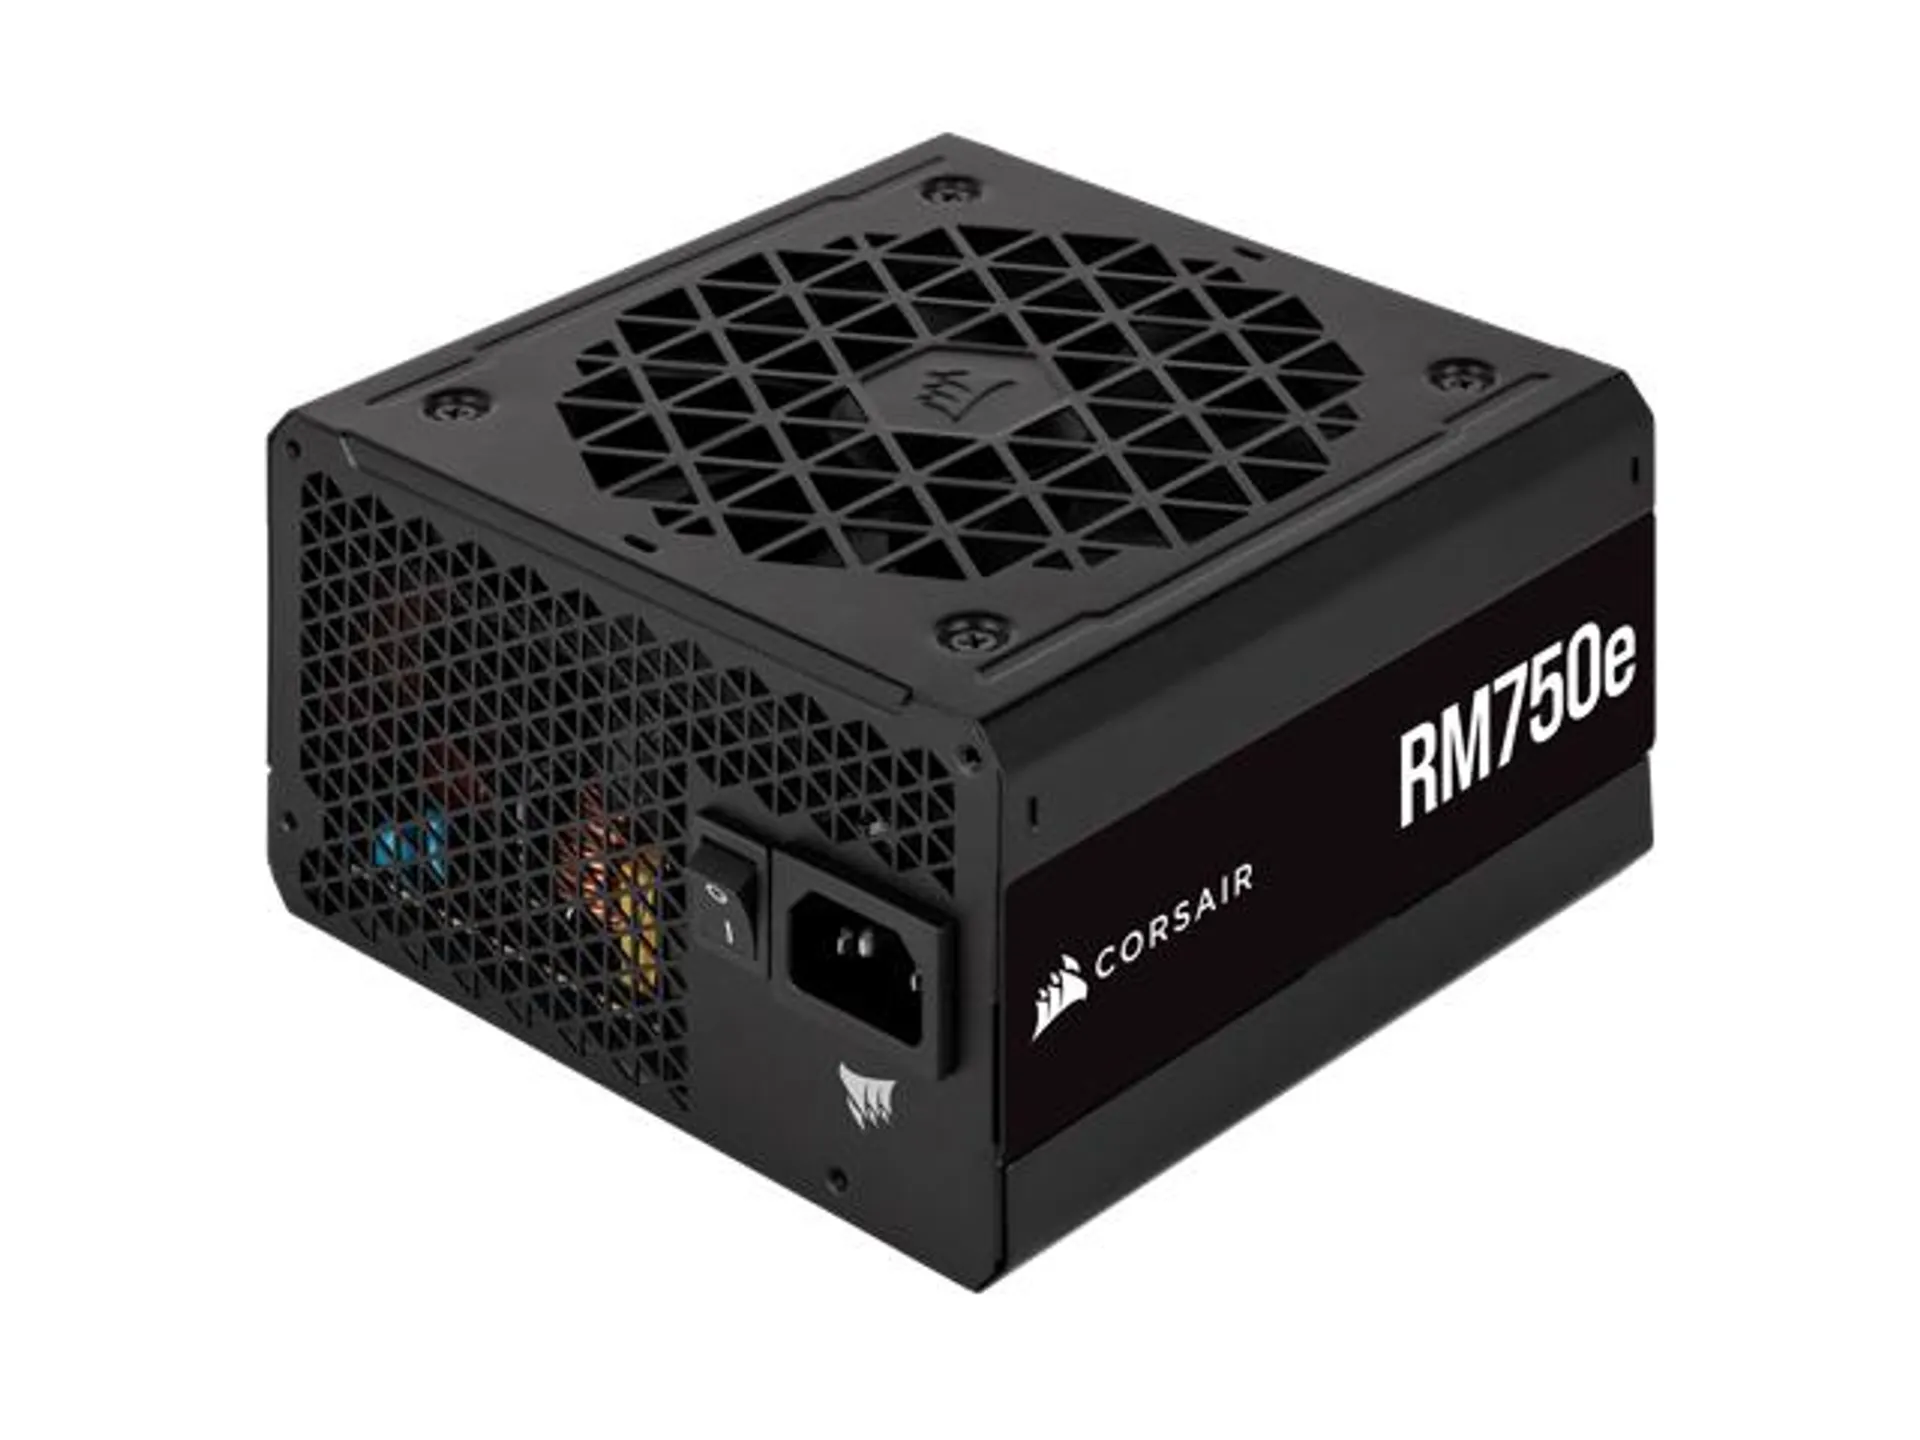 CORSAIR RM750e Fully Modular Low-Noise ATX Power Supply - ATX 3.0 & PCIe 5.0 Compliant - 105°C-Rated Capacitors - 80 PLUS Gold Efficiency - Modern Standby Support